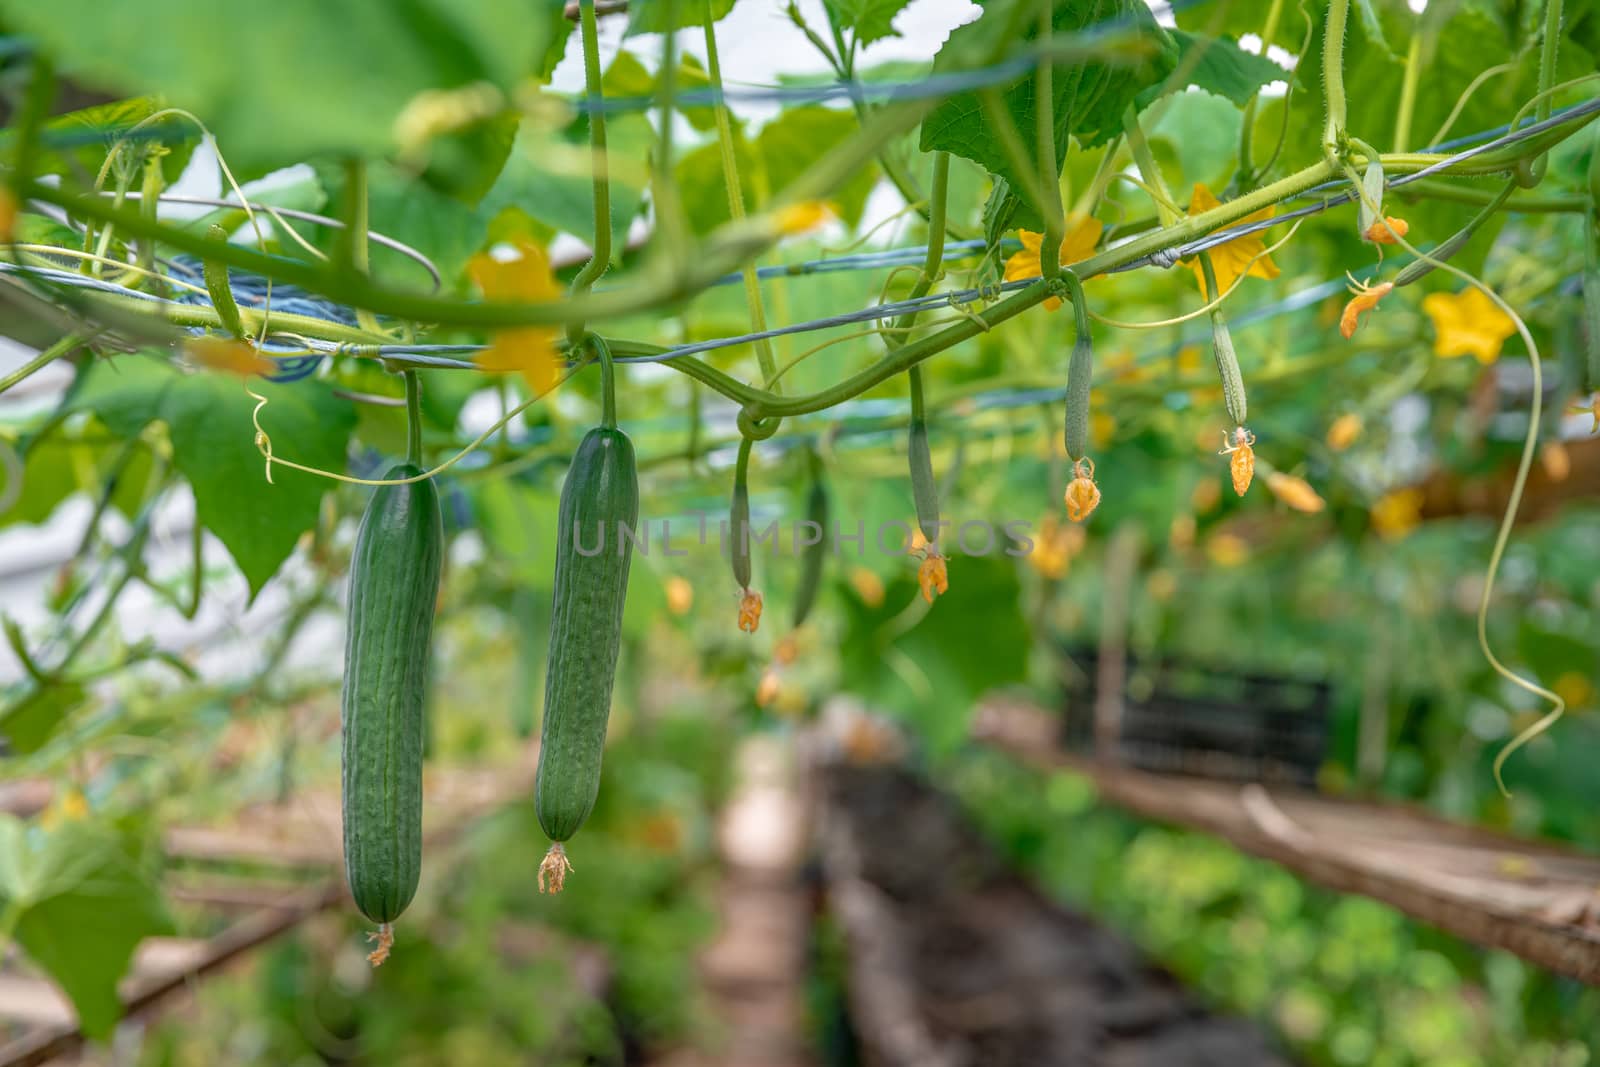 flowering plants green cucumbers growing in a greenhouse on the farm, healthy vegetables without pesticides, organic product. copy space by Edophoto